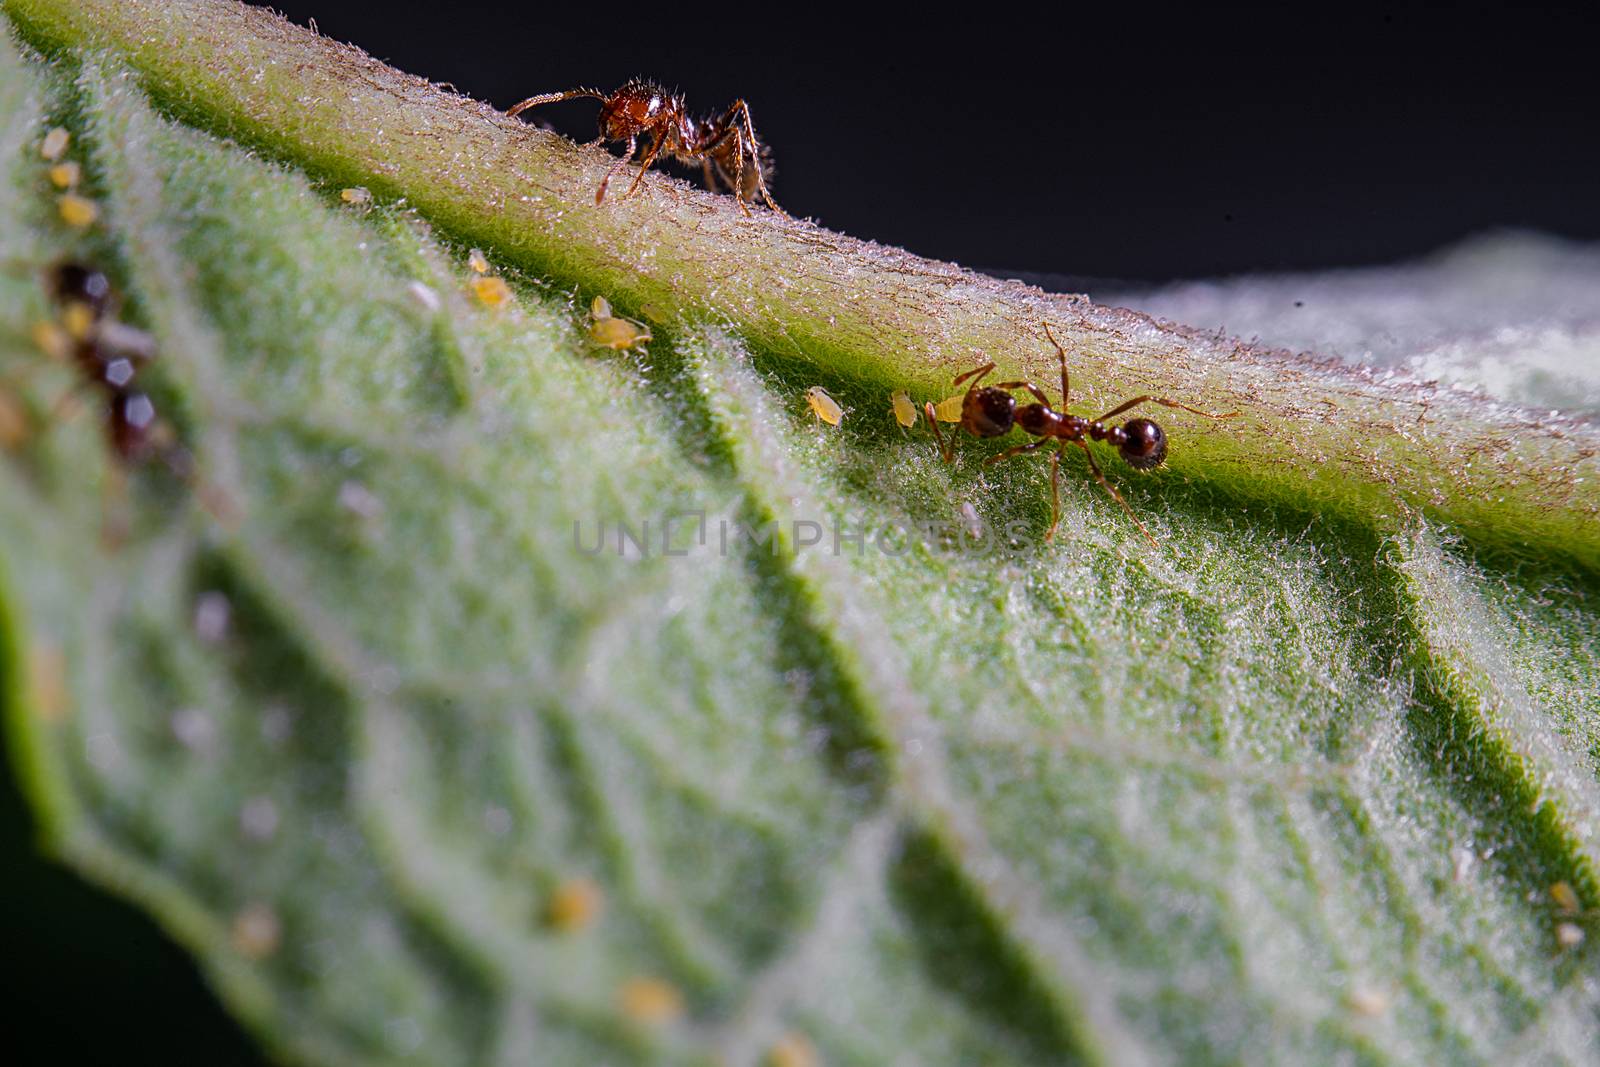 Two ants and some aphids on a green leave.